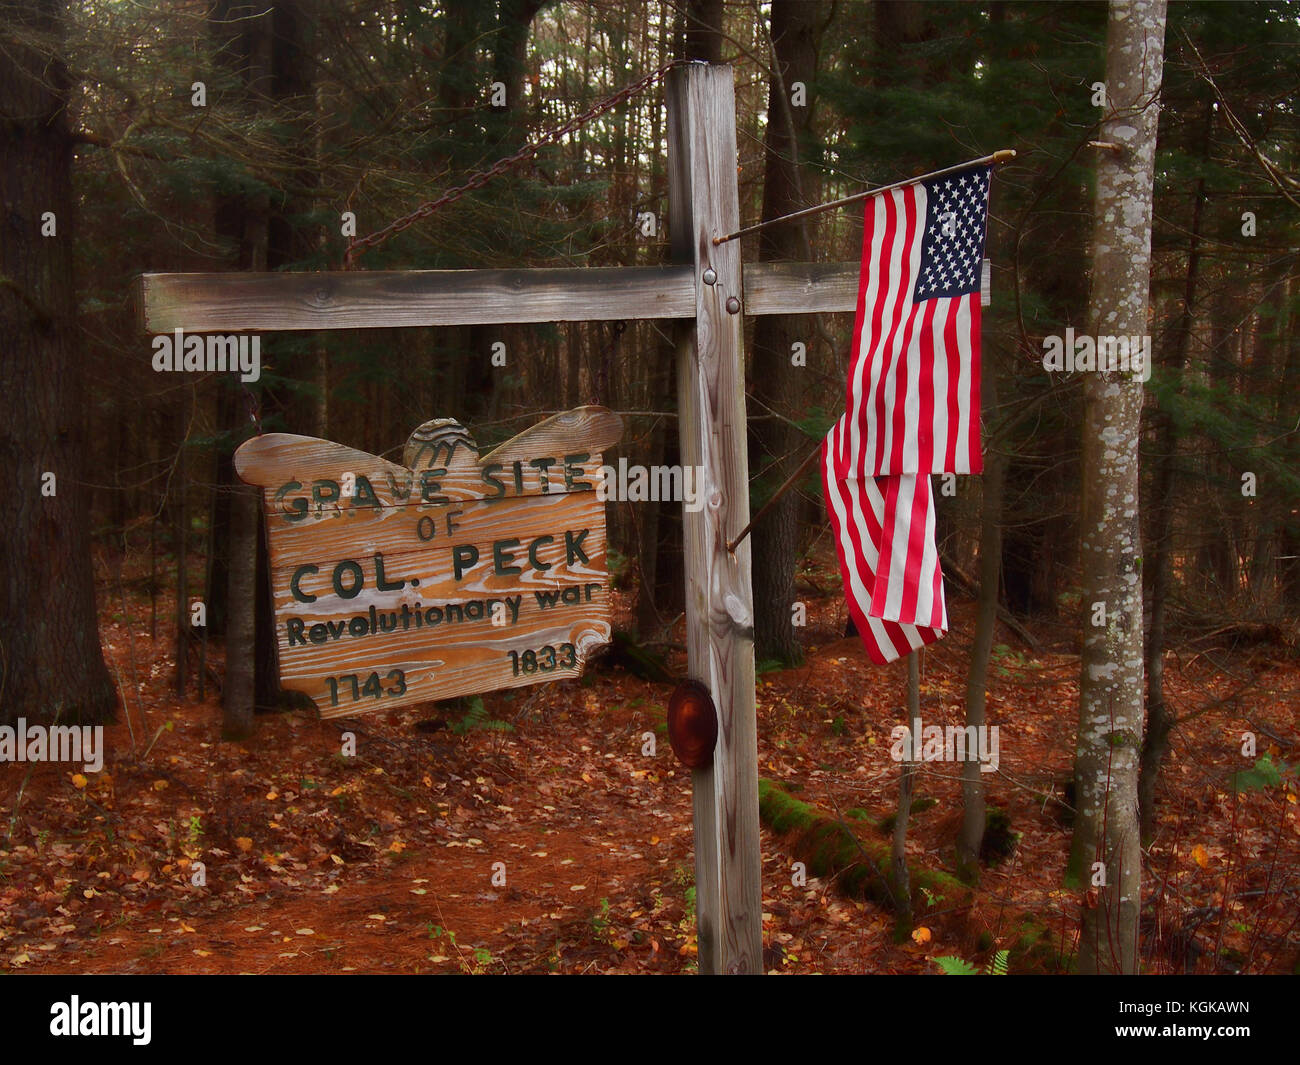 Speculator, New York, USA. November 4, 2017. Marker leading to the grave of Colonel Loring Peck, Hamilton County's only Revolutionary War officer in S Stock Photo